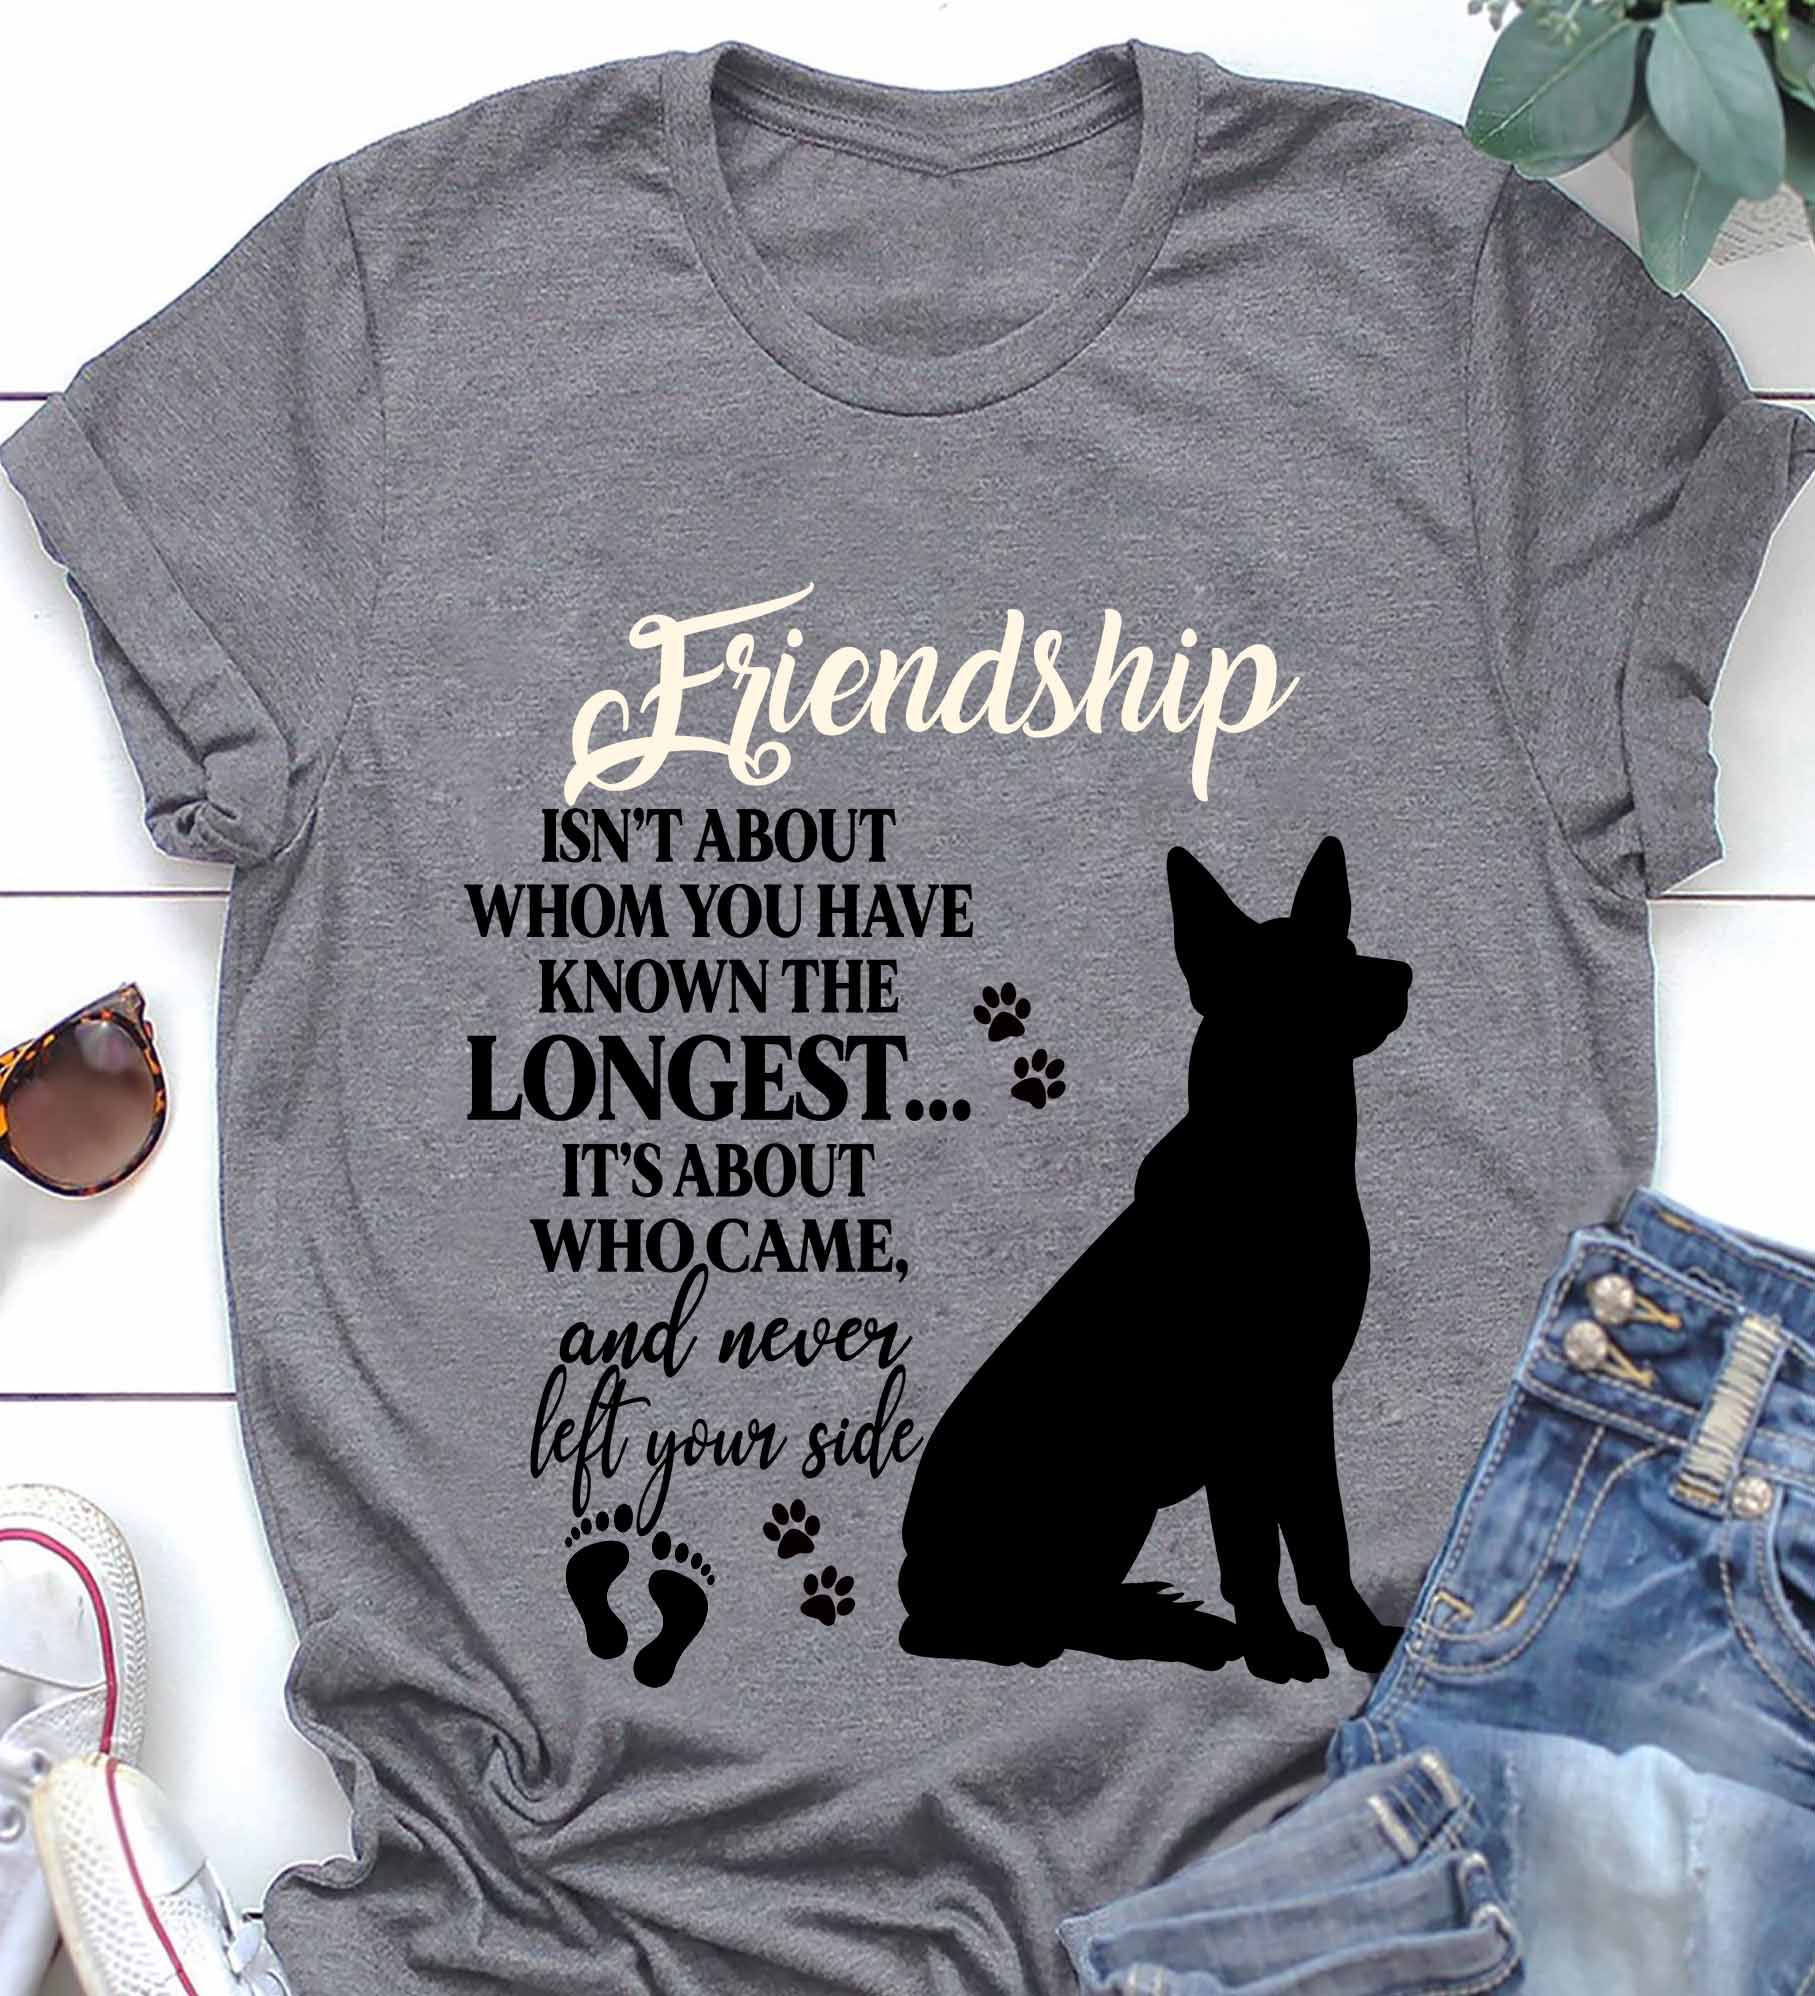 Friendship isn't about whom you have known the longest it's about who came and never left your side - Dog lover